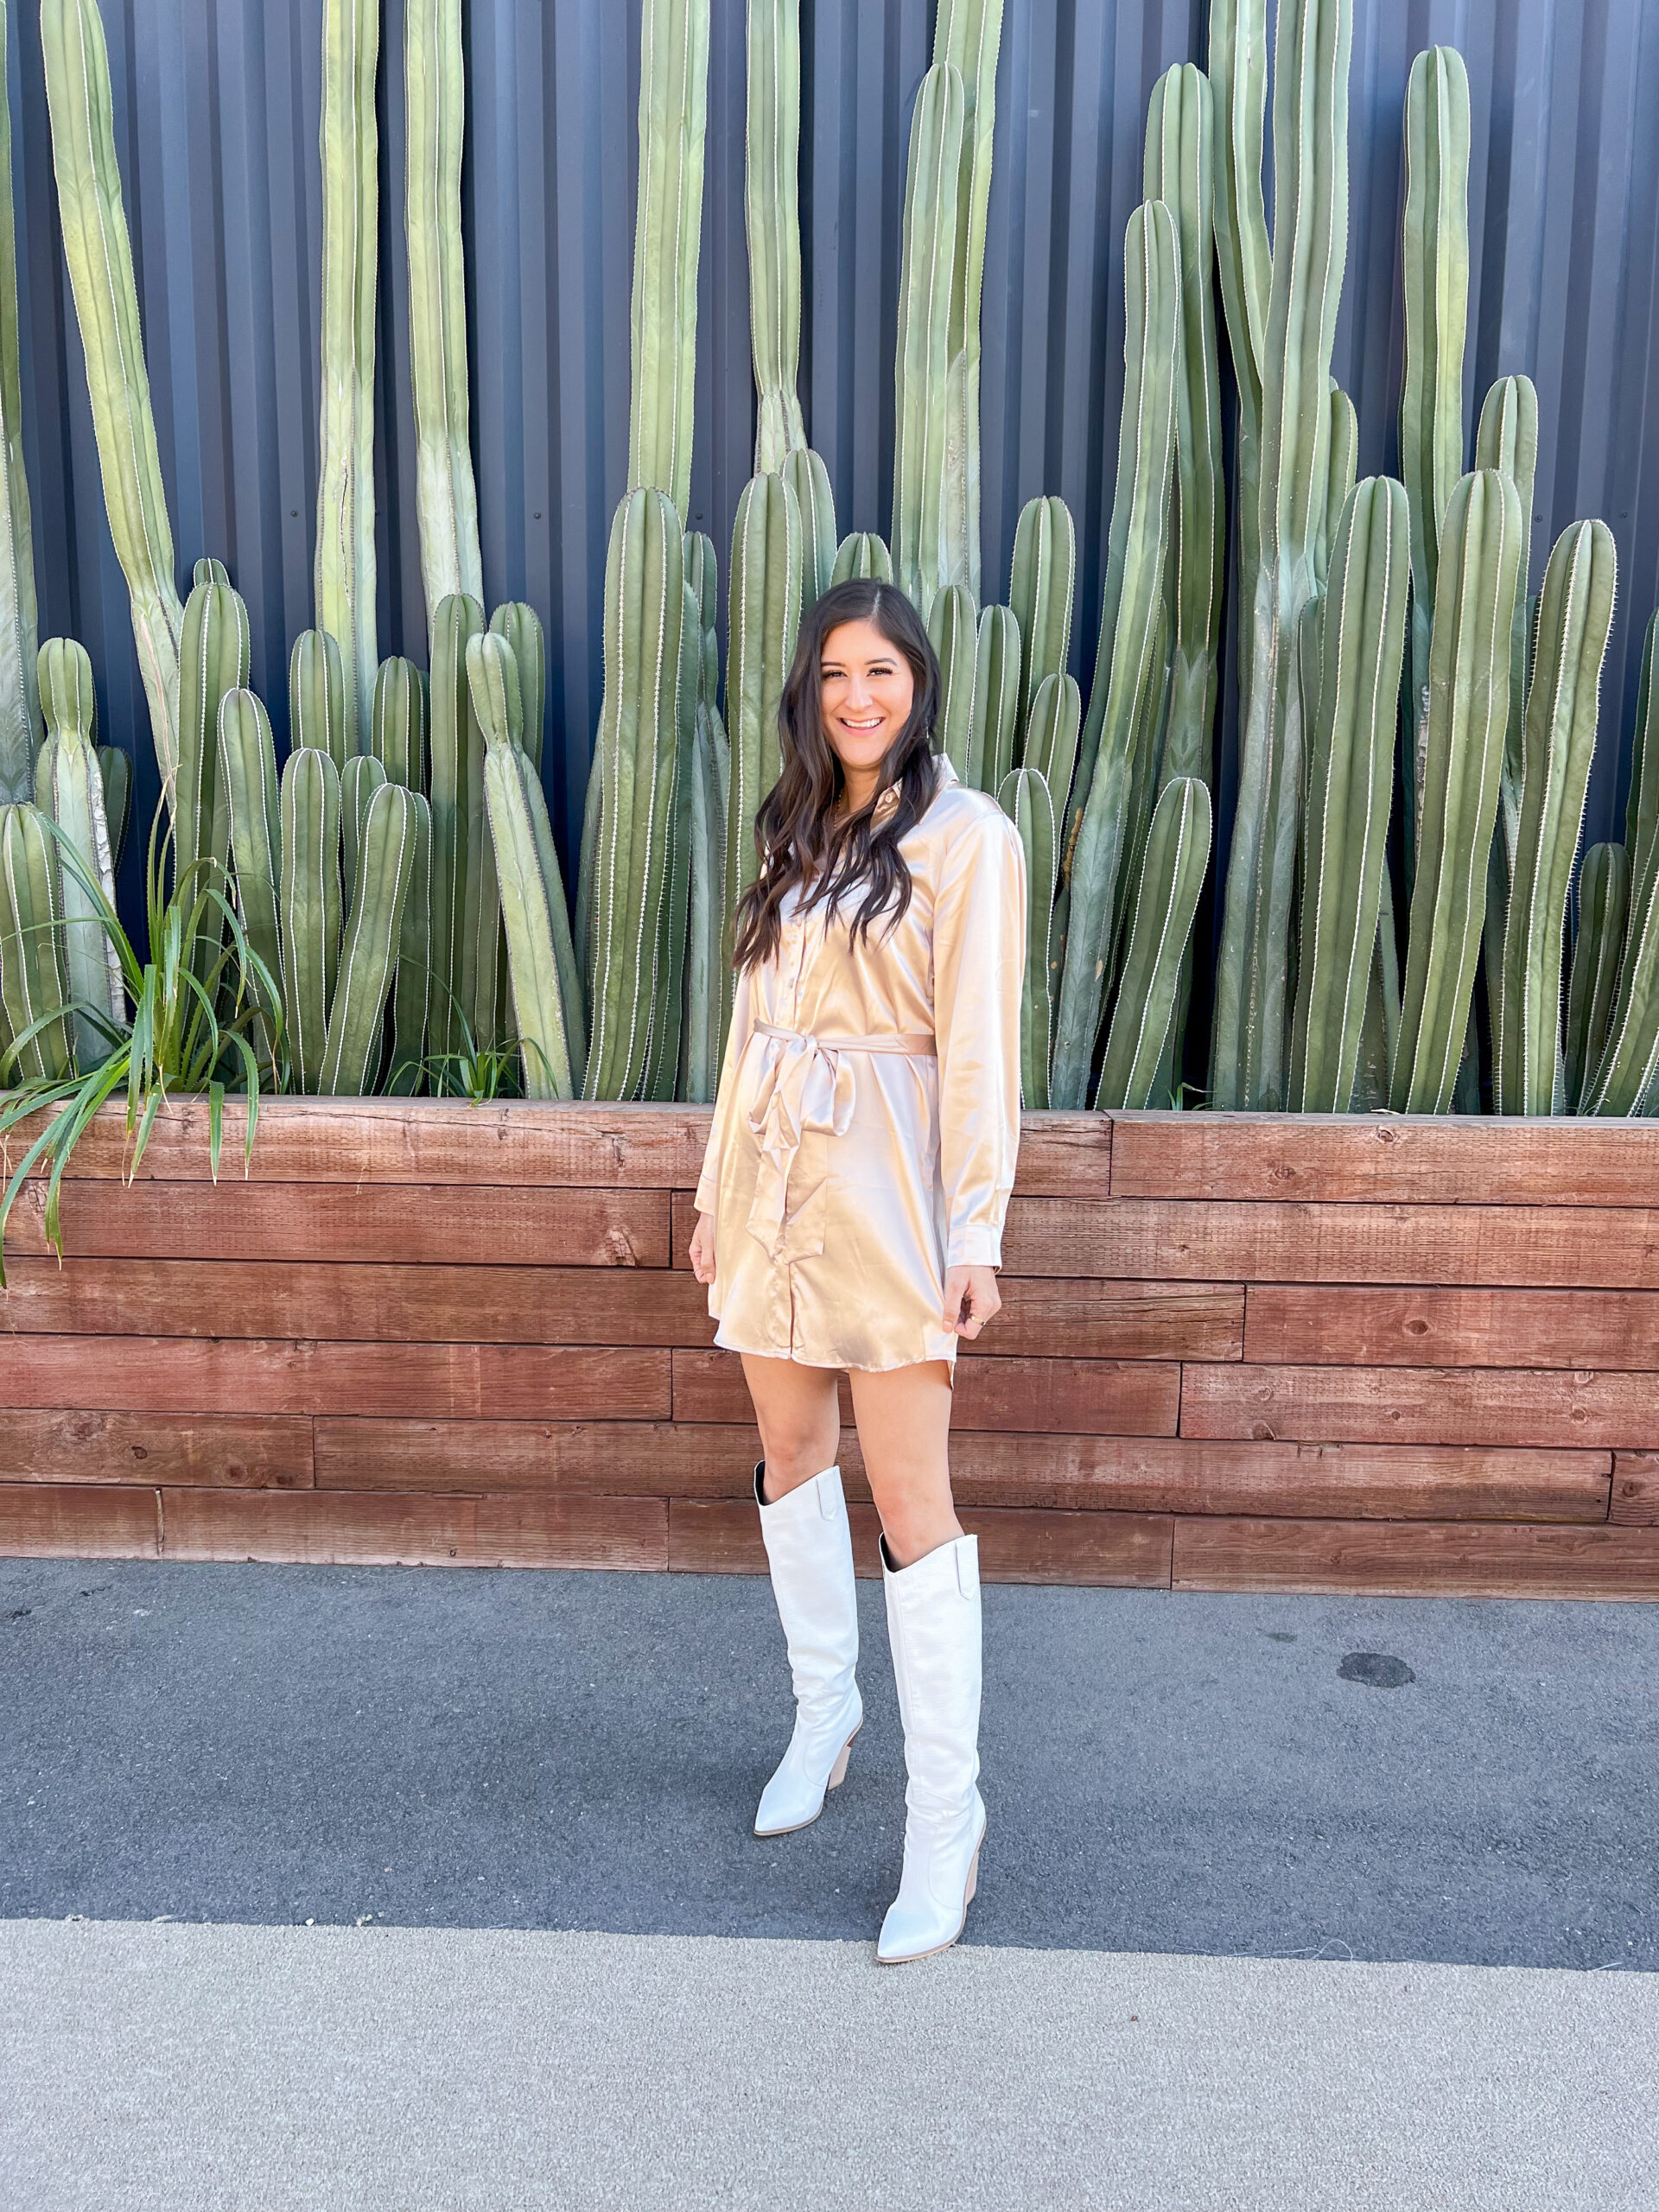 How to Style Cowboy boots: 10 tips and outfit ideas - The Fashionable Maven